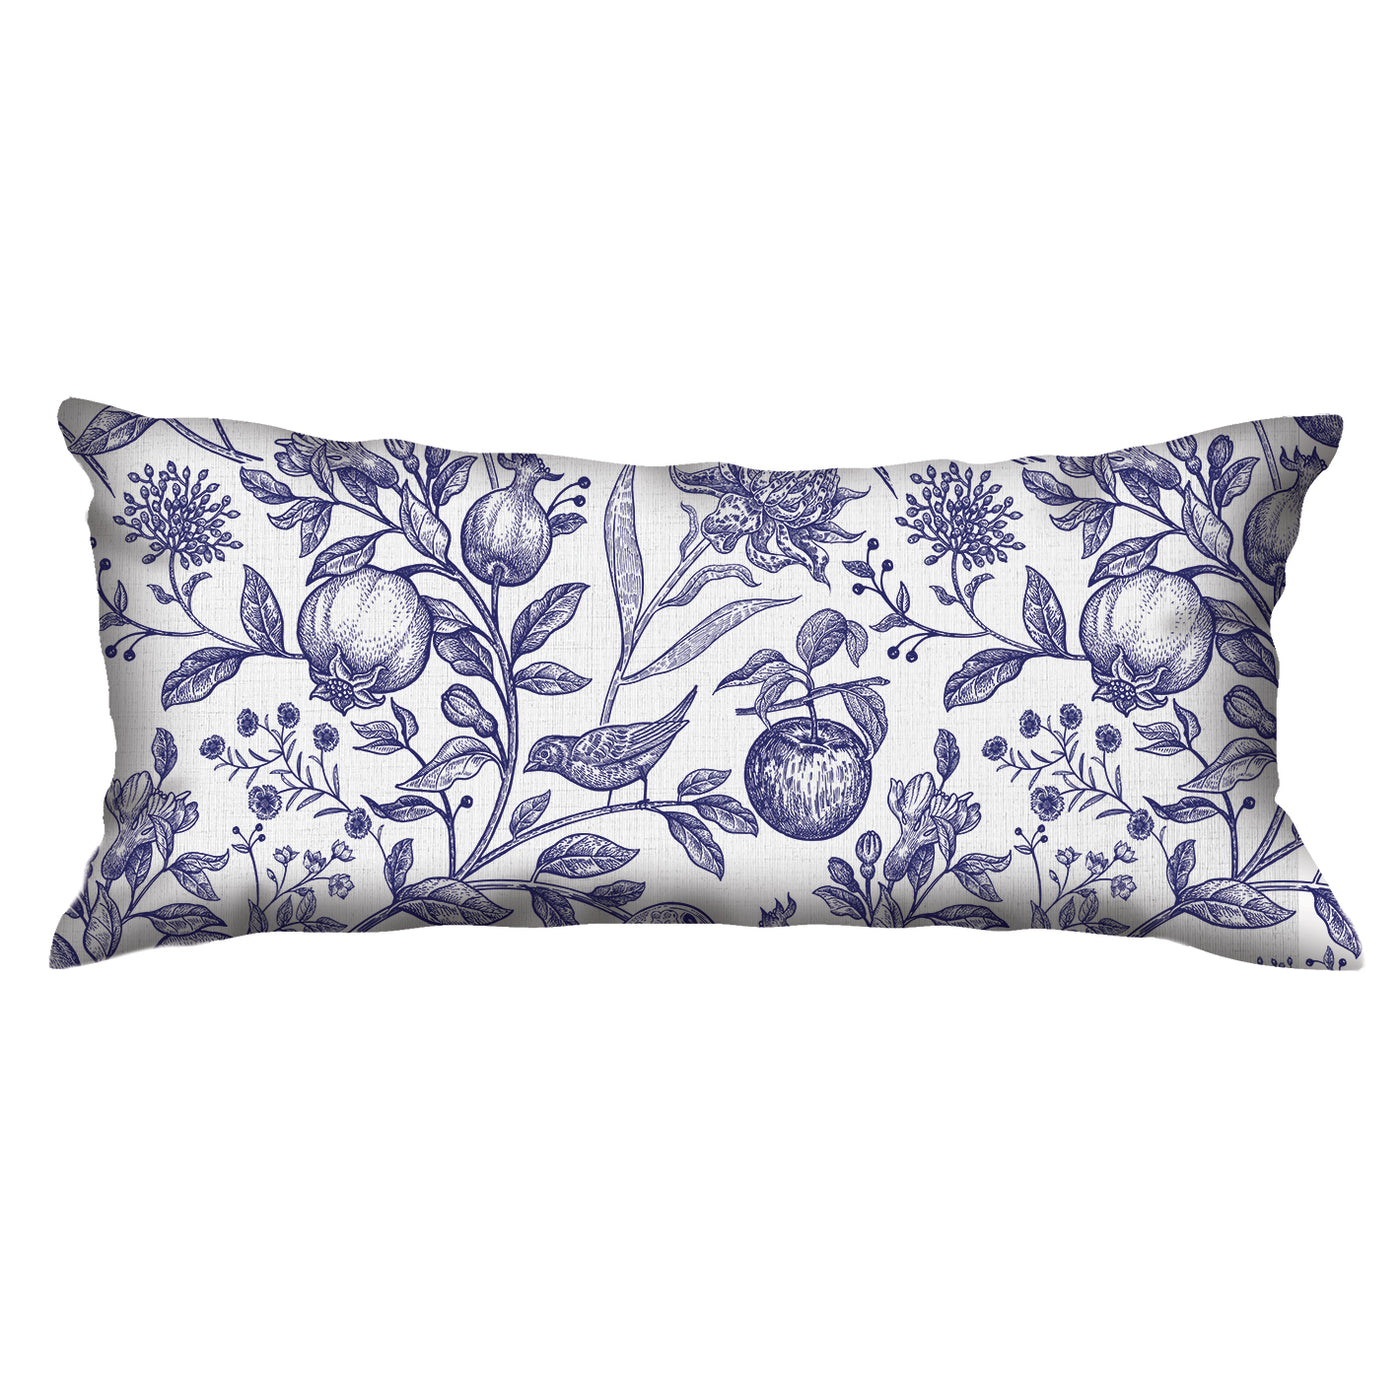 Scatter Cushion  - Delft blauw exotic flowers, birds and fruits